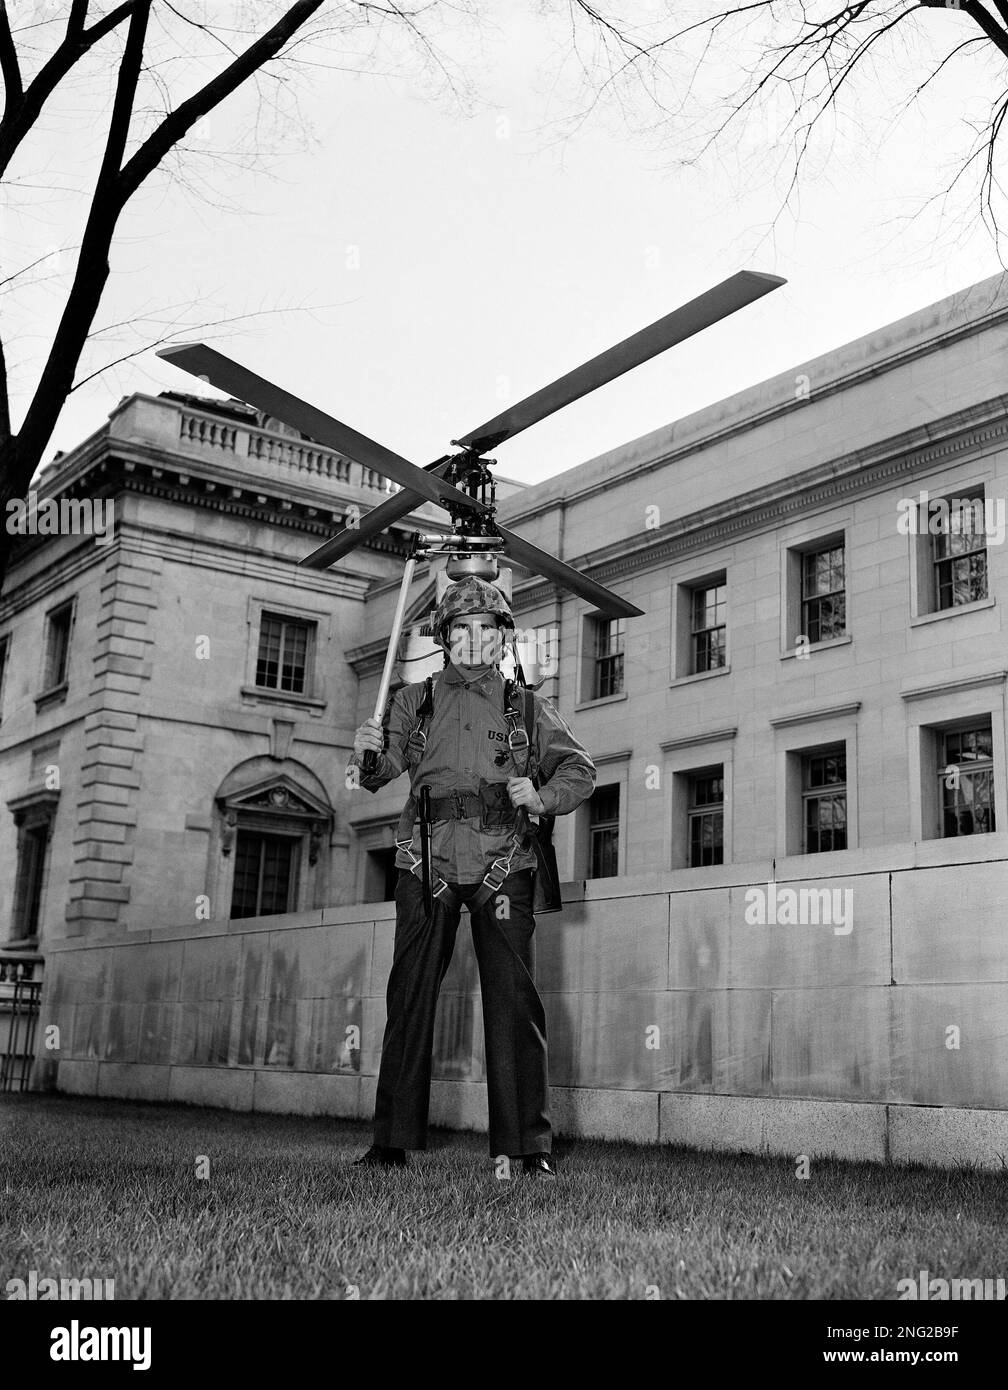 T/Sgt. Daniel Murphy demonstrates the "Hoppi-Copter," a one-man helicopter strapped to the shoulders like a knapsack and capable of flying a fully armed man, in Washington on Feb. 15, 1952. This is an actual model, but Sgt. Murphy didn't fly it. It came from inside Constitution Hall, part of an exhibit of Navy firepower and technology. (AP Photo/Harvey Georges) Stock Photo